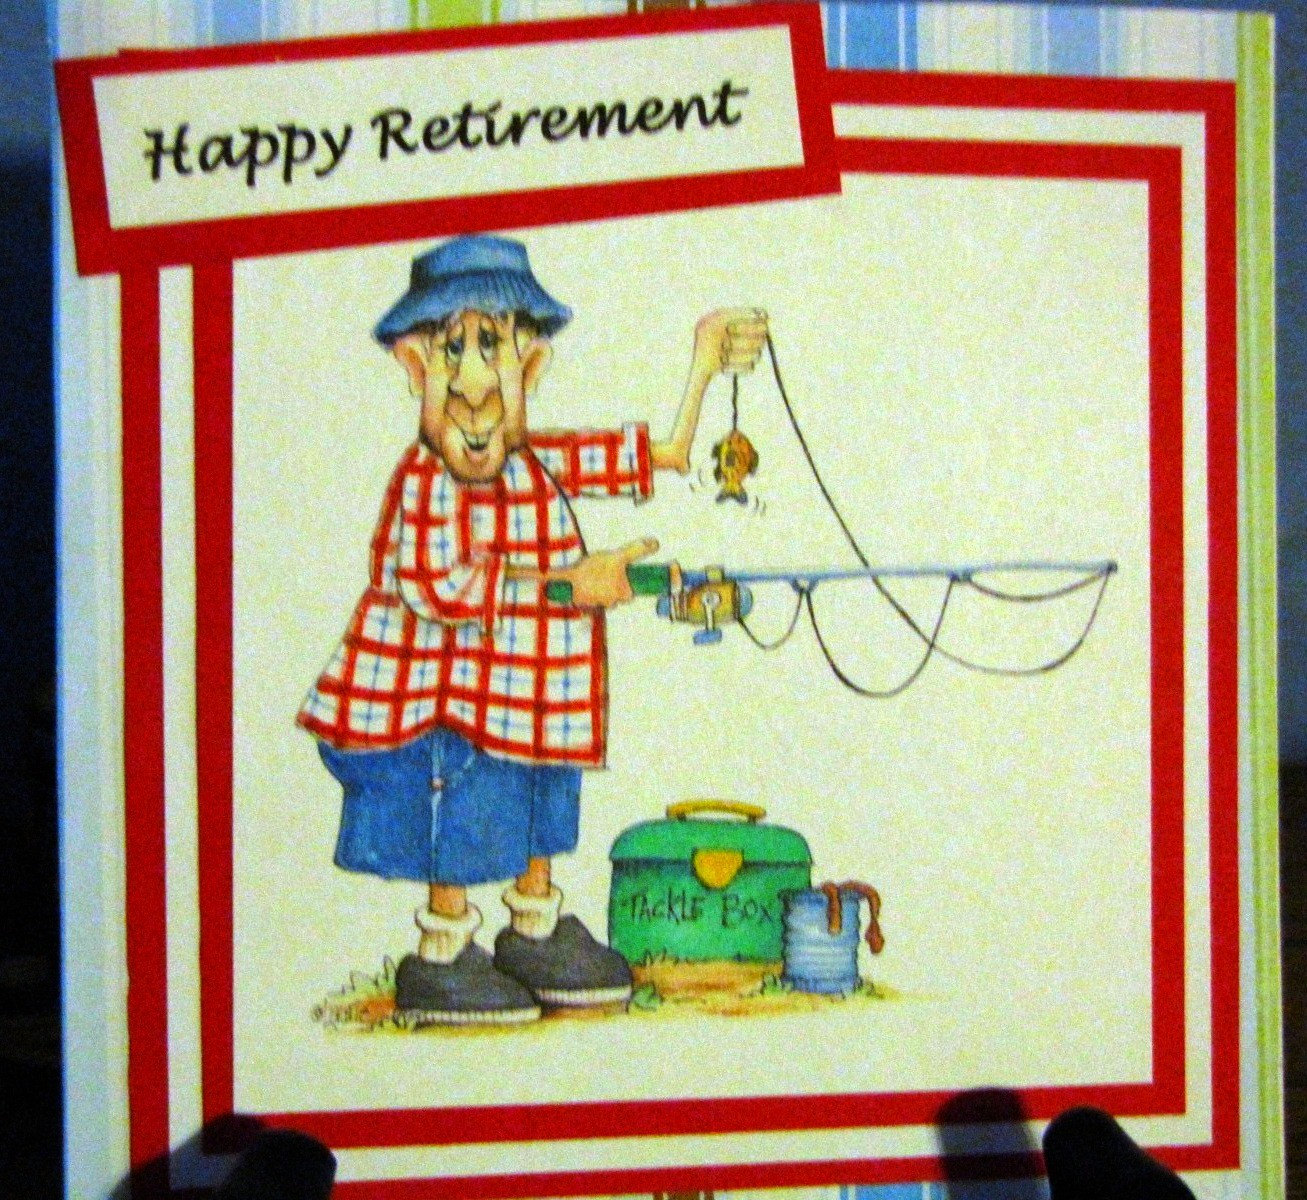 Retirement card for a male Greeting card for retirement